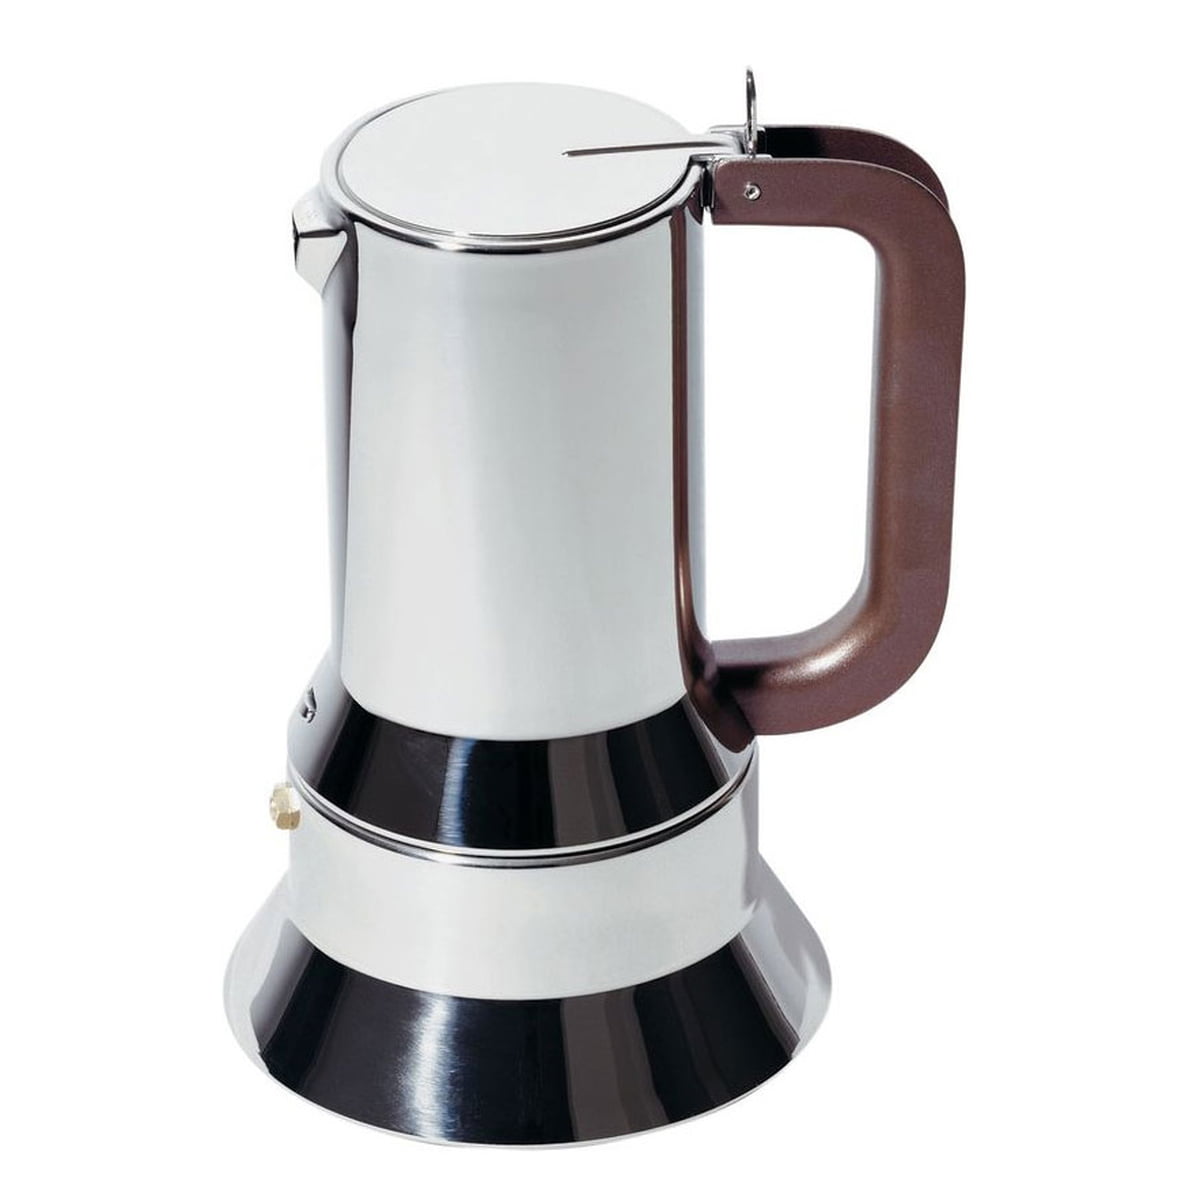 Alessi Espresso Coffee Maker with Magnetic Base 9090/6 FM 6 Cups, 